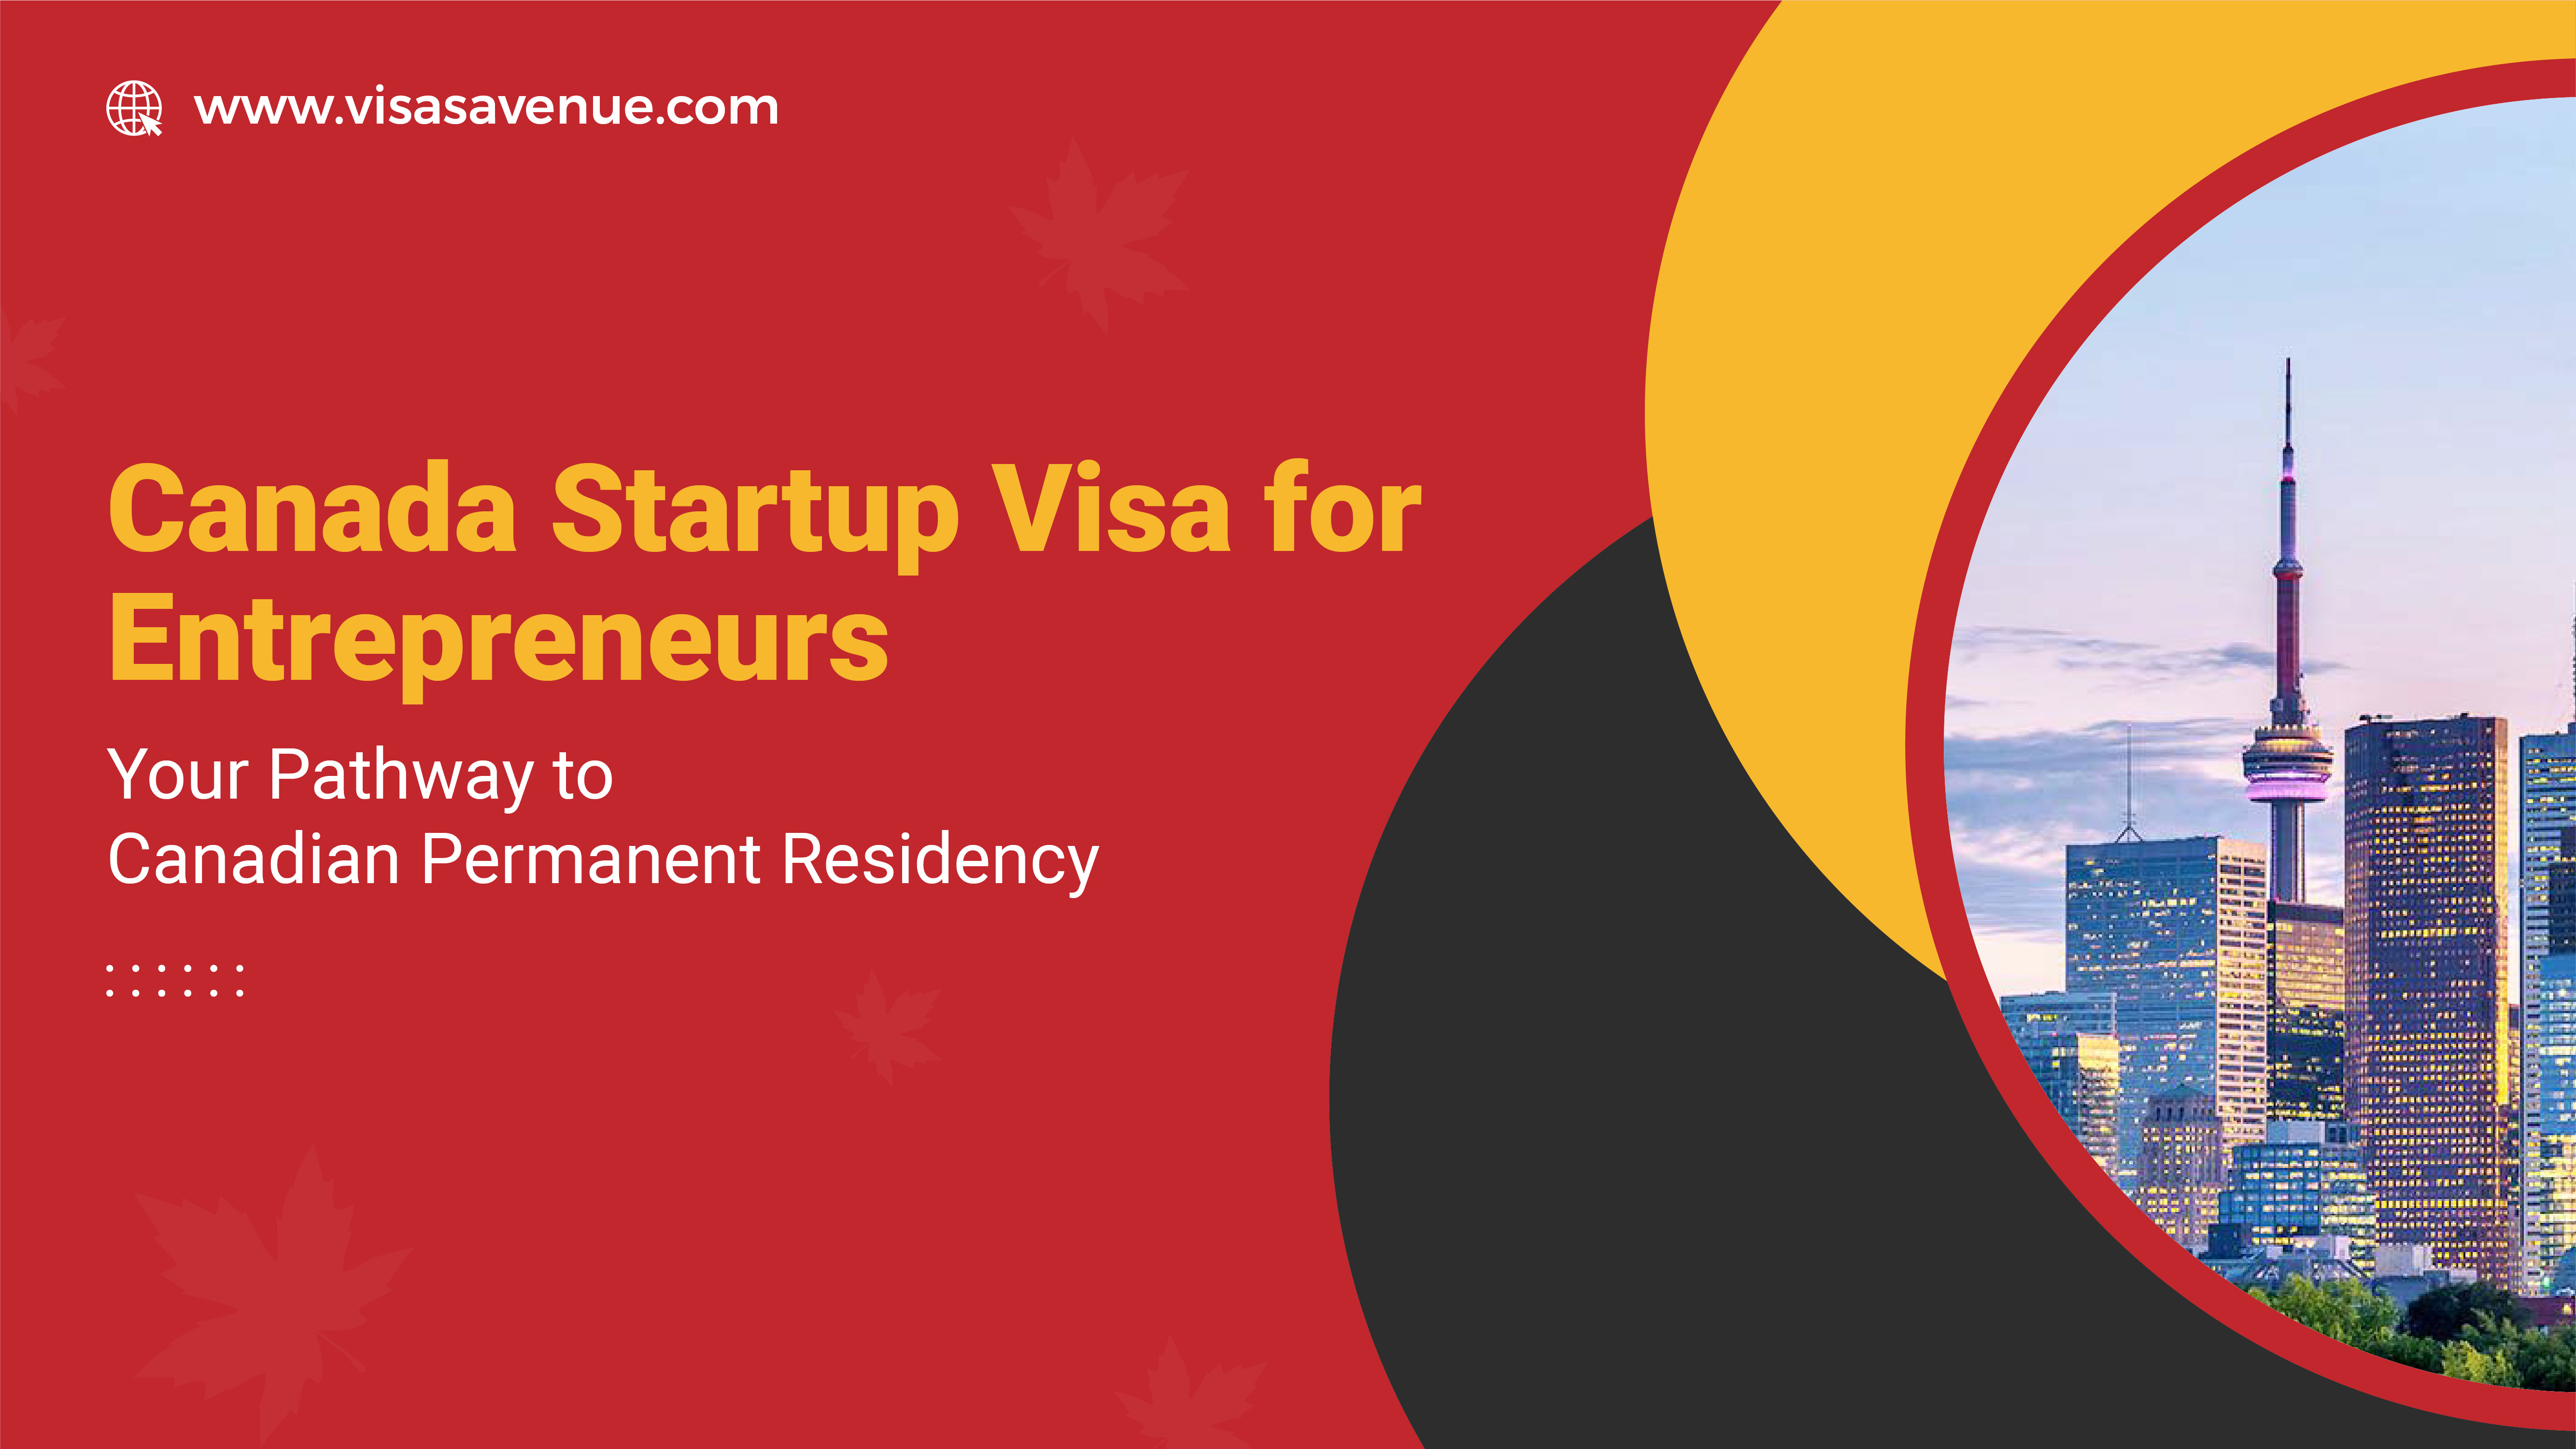 Canada Startup Visa for Entrepreneurs- Your Pathway to Canadian Permanent Residency